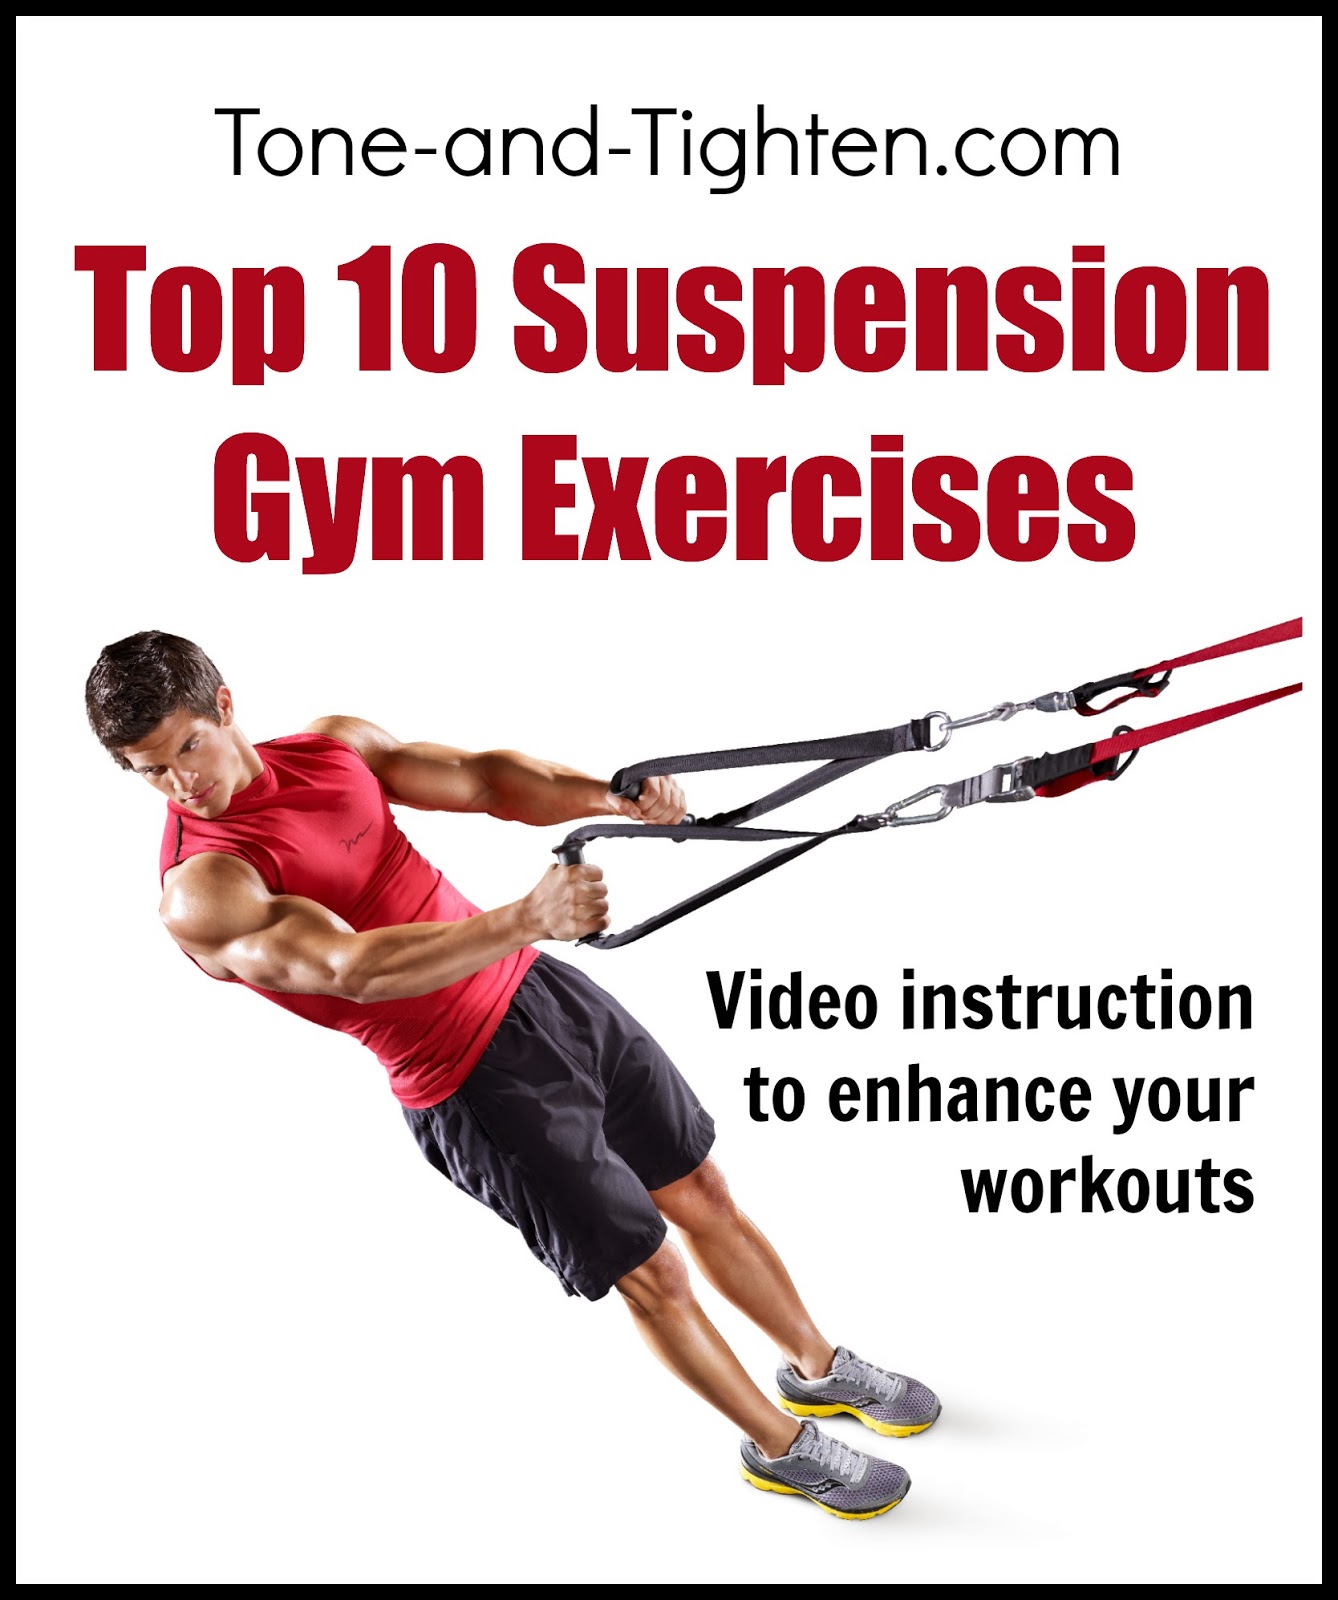 Top 10 Suspension Gym Exercises – Video Workout